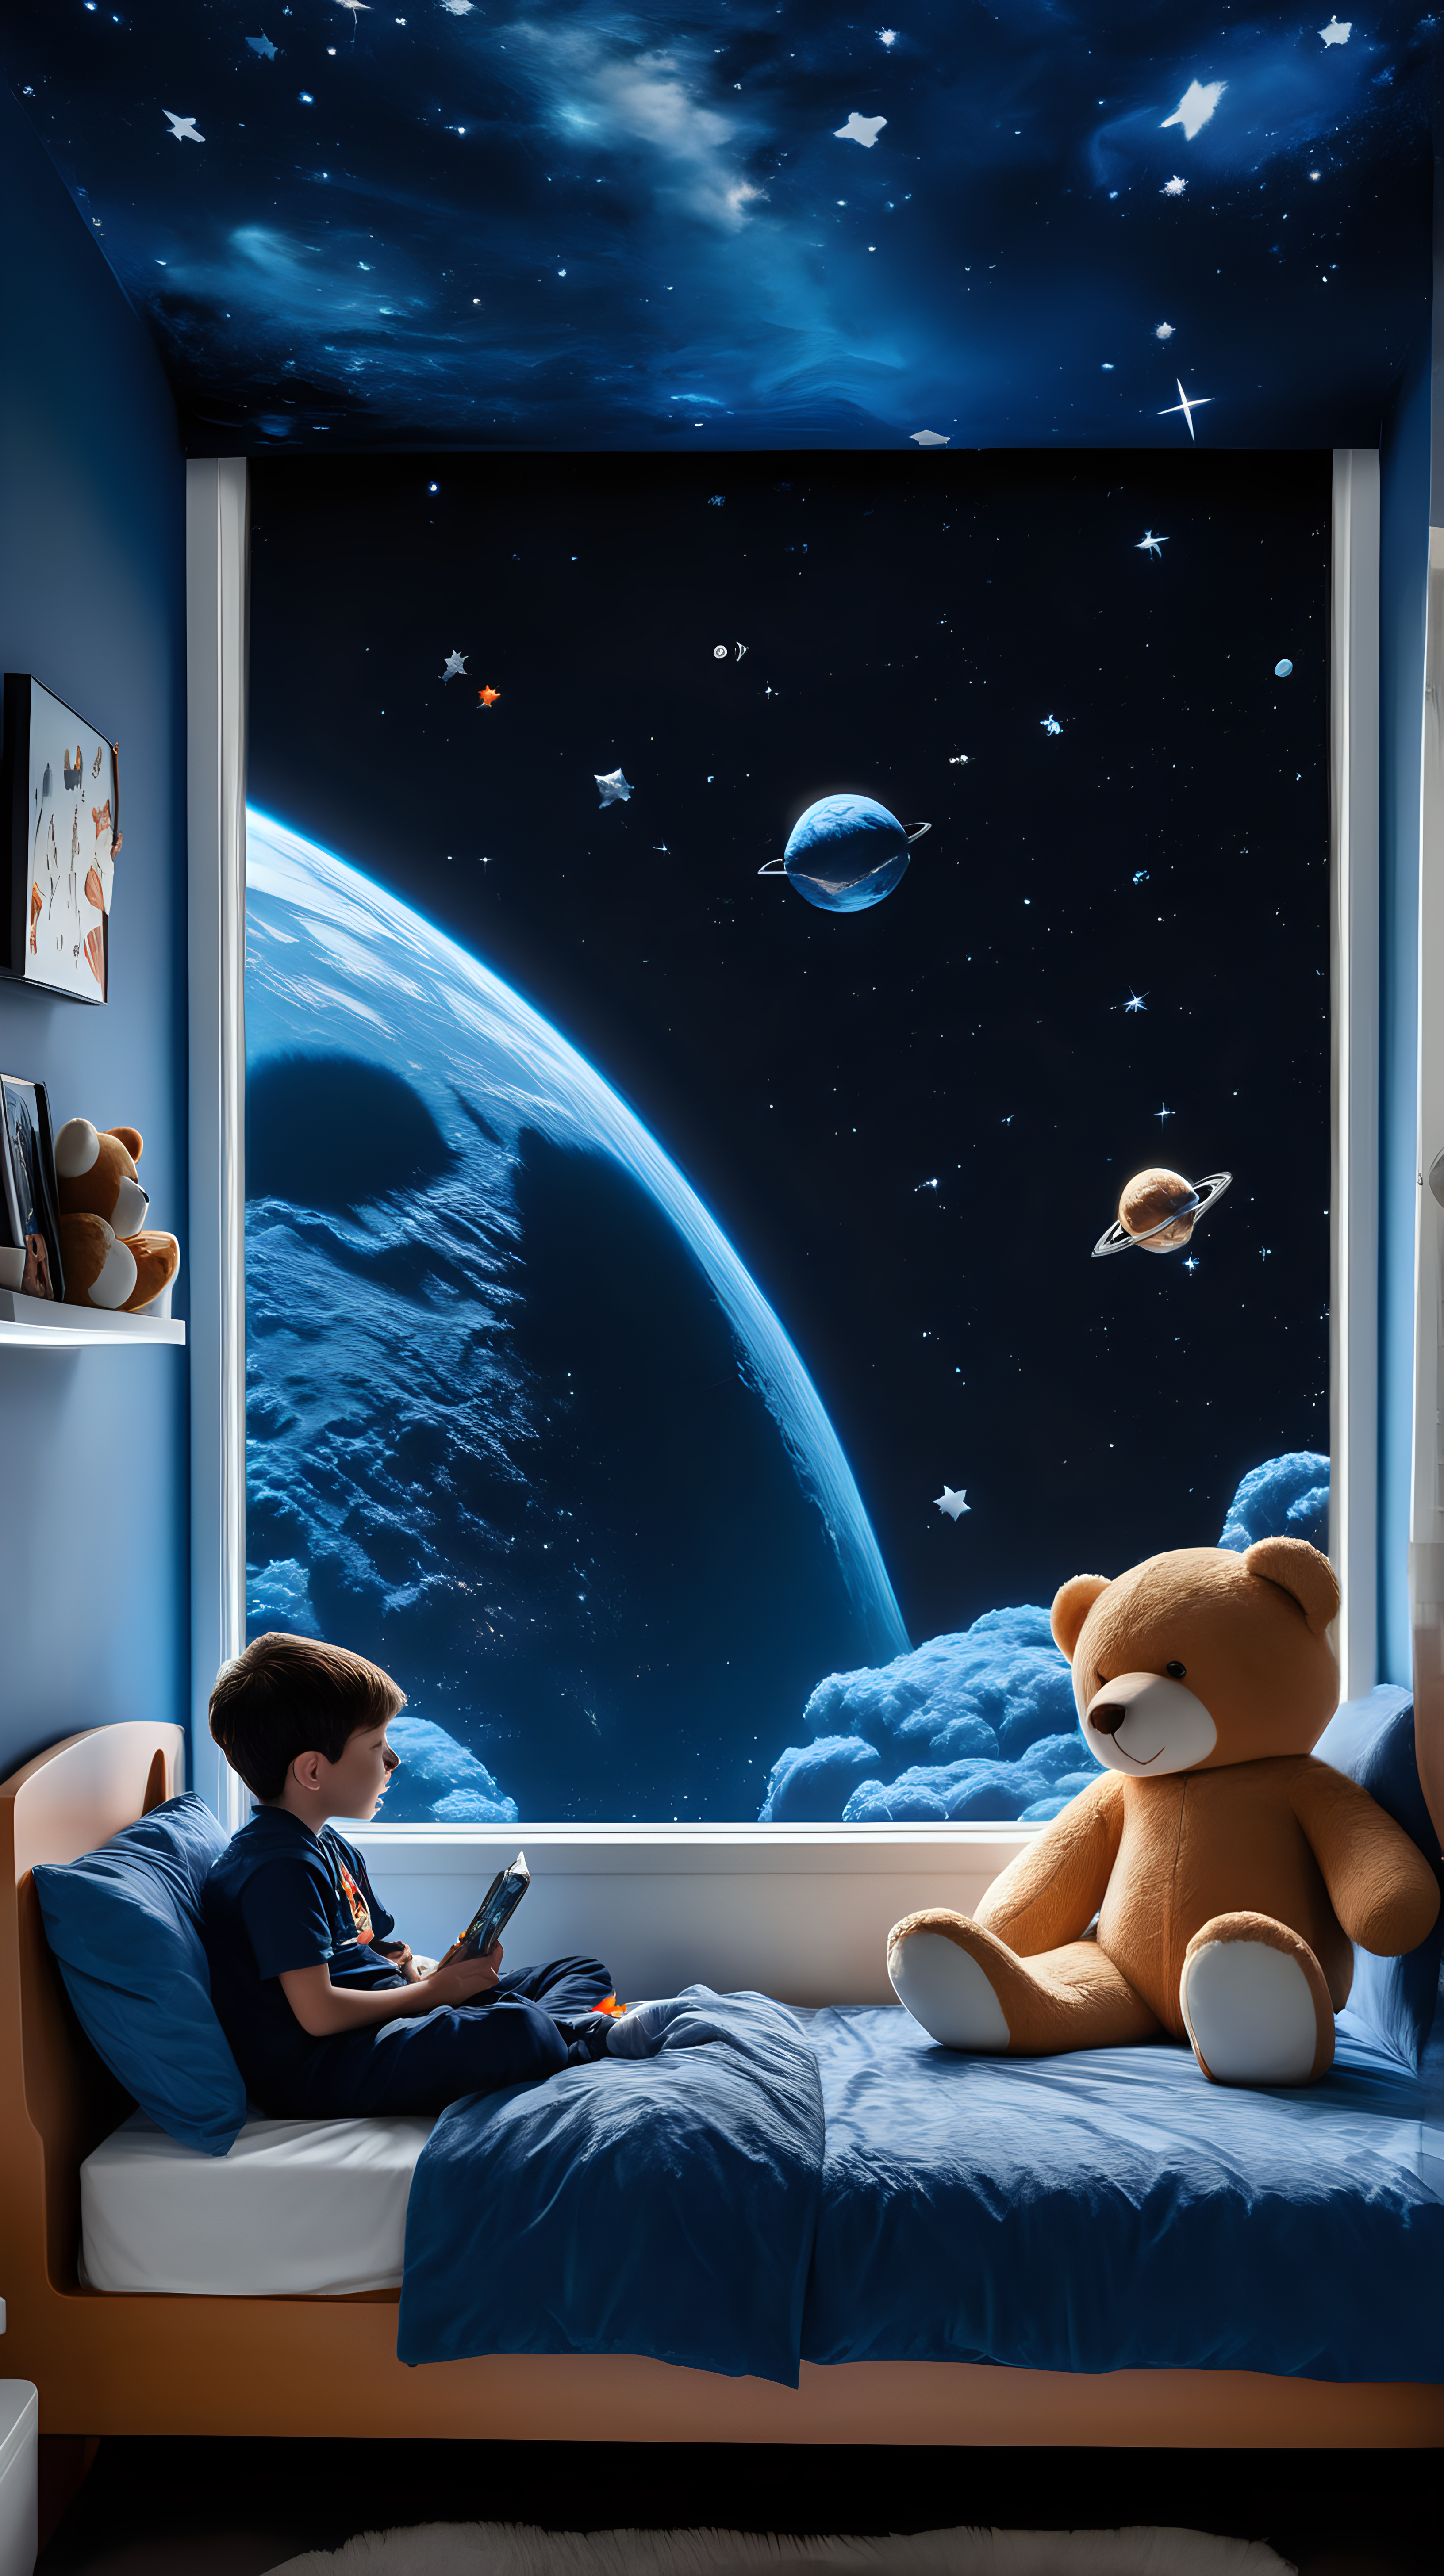 A cozy bedroom with dark blue wallpapers. A child stands on a bed with a teddy bear. Outside, an astronaut and colorful galaxies fill the window view.